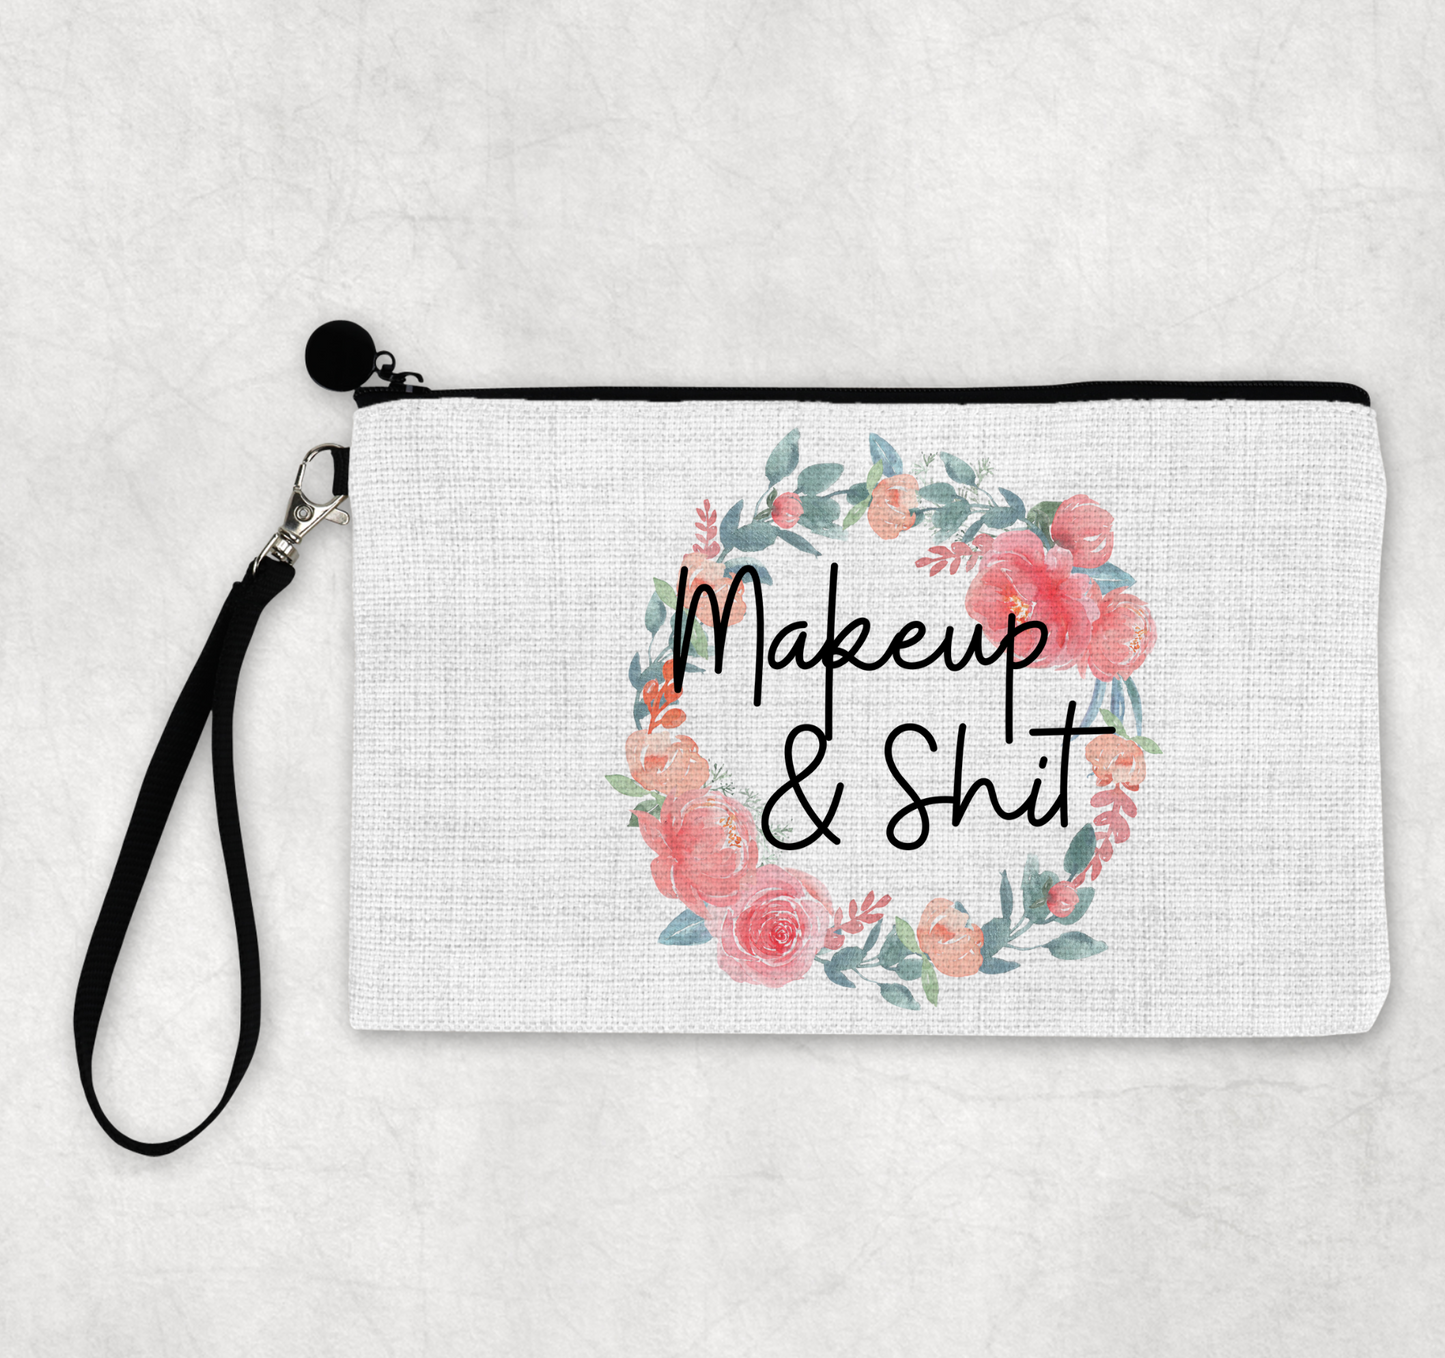 Makeup Pouch: Makeup and Shit